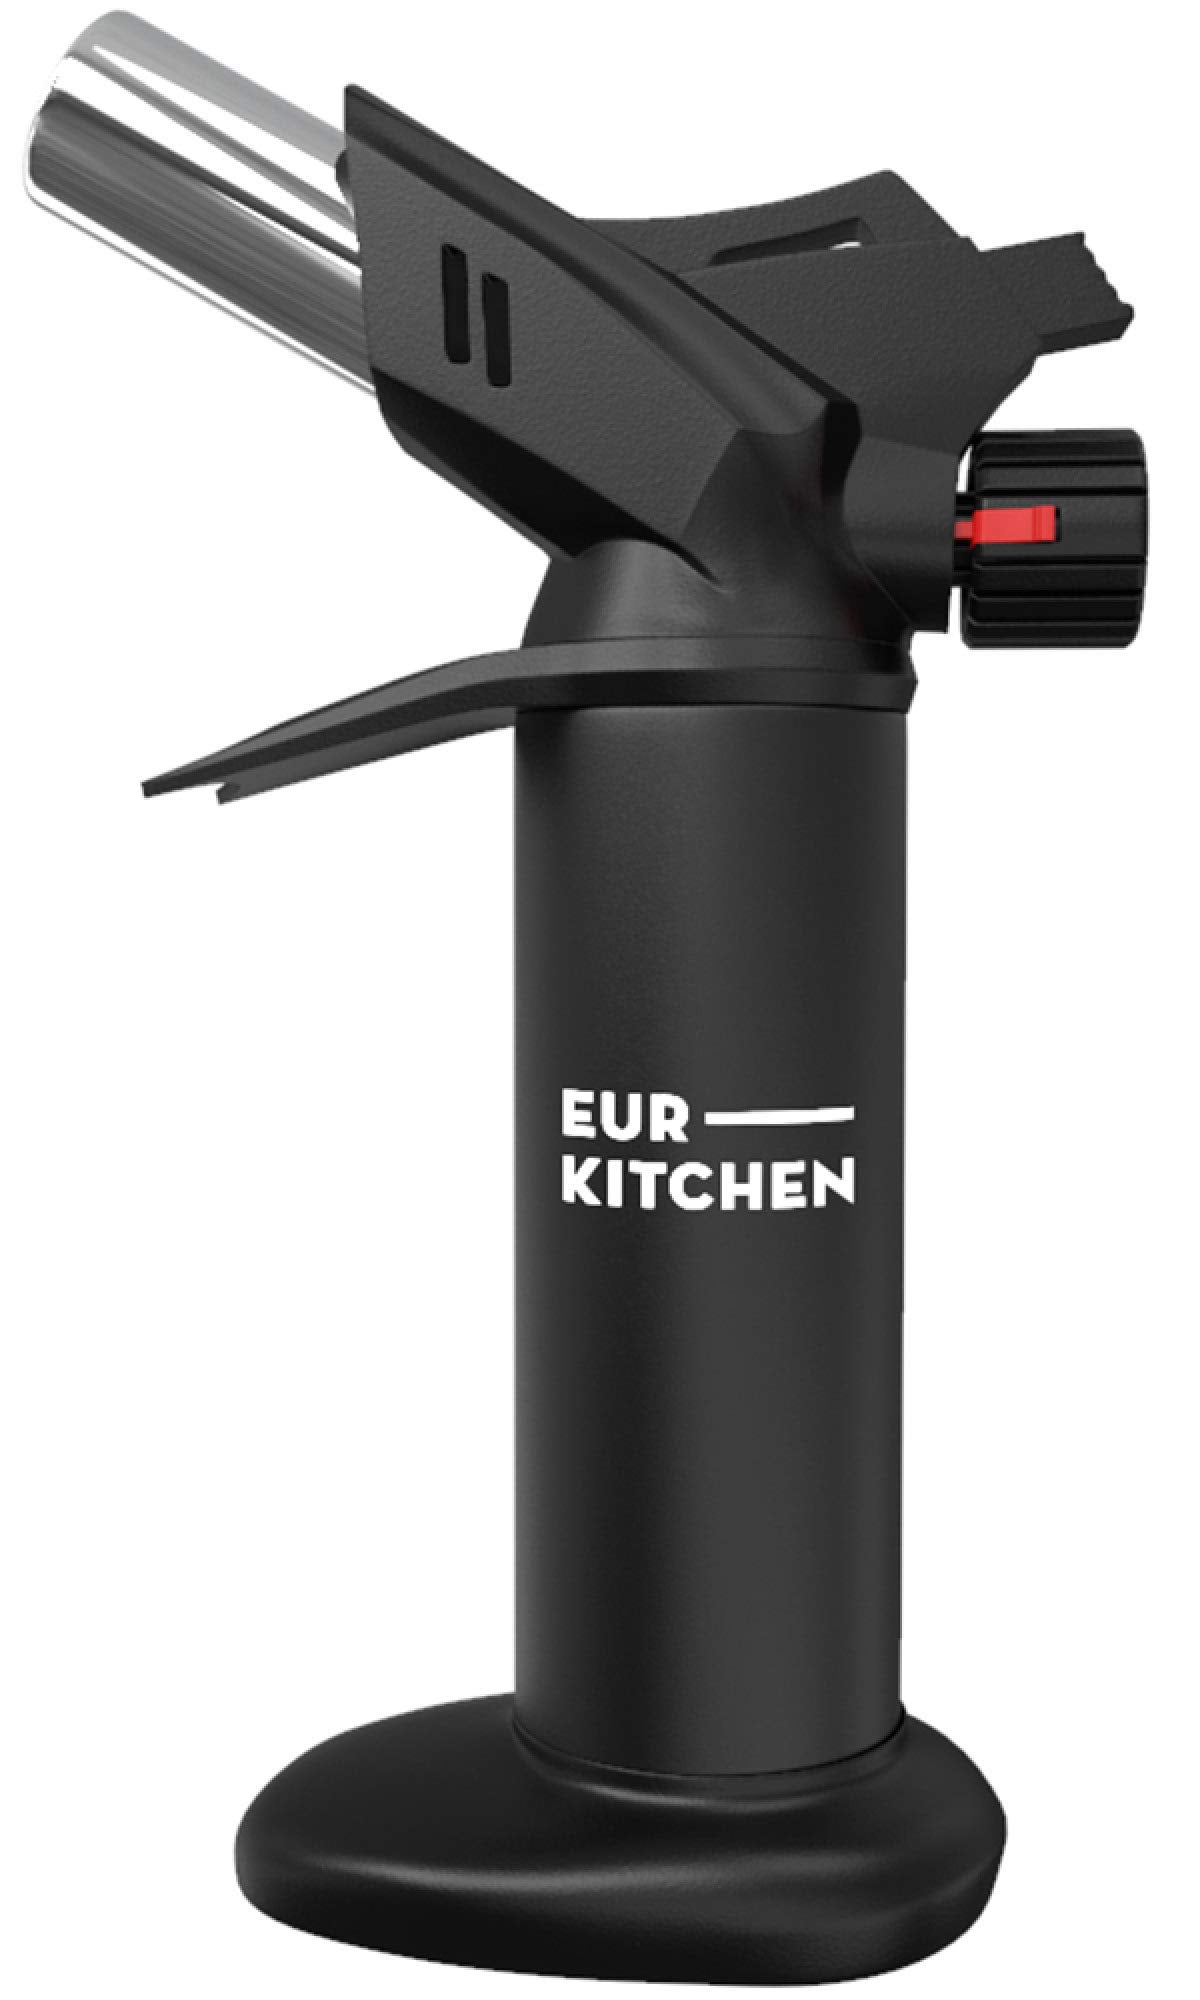 Butane Torch,WOHOME Blow Kitchen Torch Chef Cooking Culinary Torch Lighter with Safety Lock Adjustable Flame Lighter Best for Baking BBQ Butane Gas Not Include Creme Brulee,Camping 